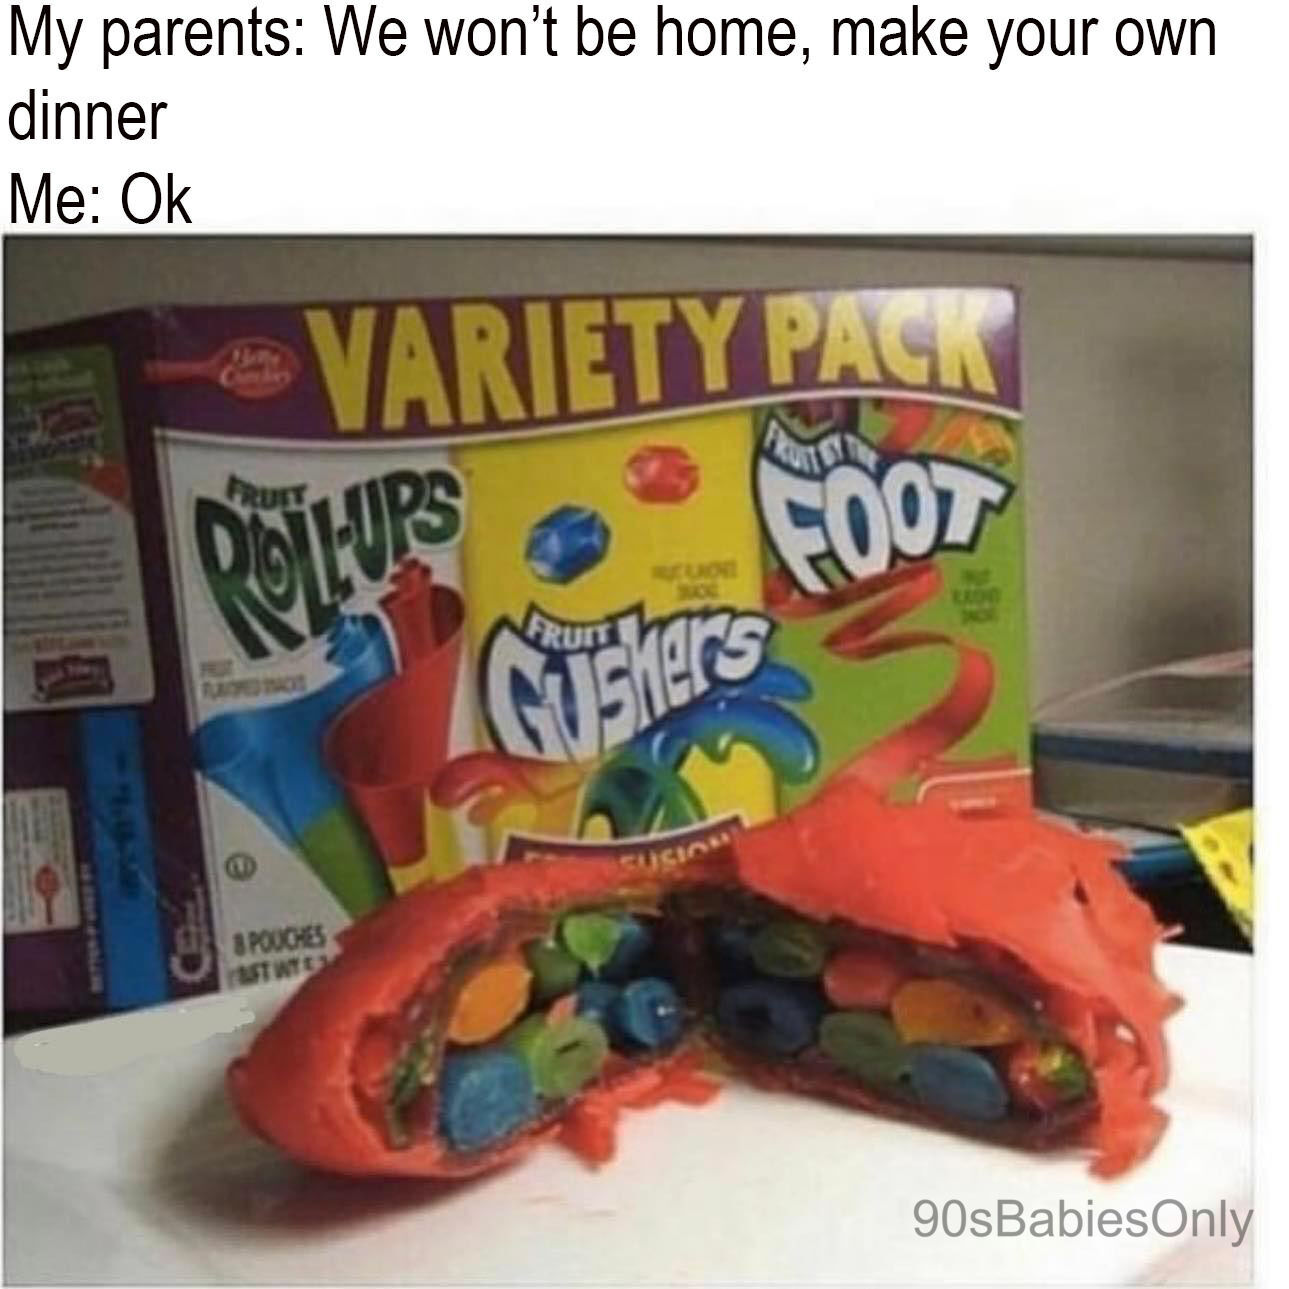 A variety pack of Fruit Roll-Ups, Fruit Gushers, and Fruit by the Fruit behind a plate that combines all three snacks like a sandwich. 

Text above image: 
My parents: We won't be home, make your own dinner
Me: Ok